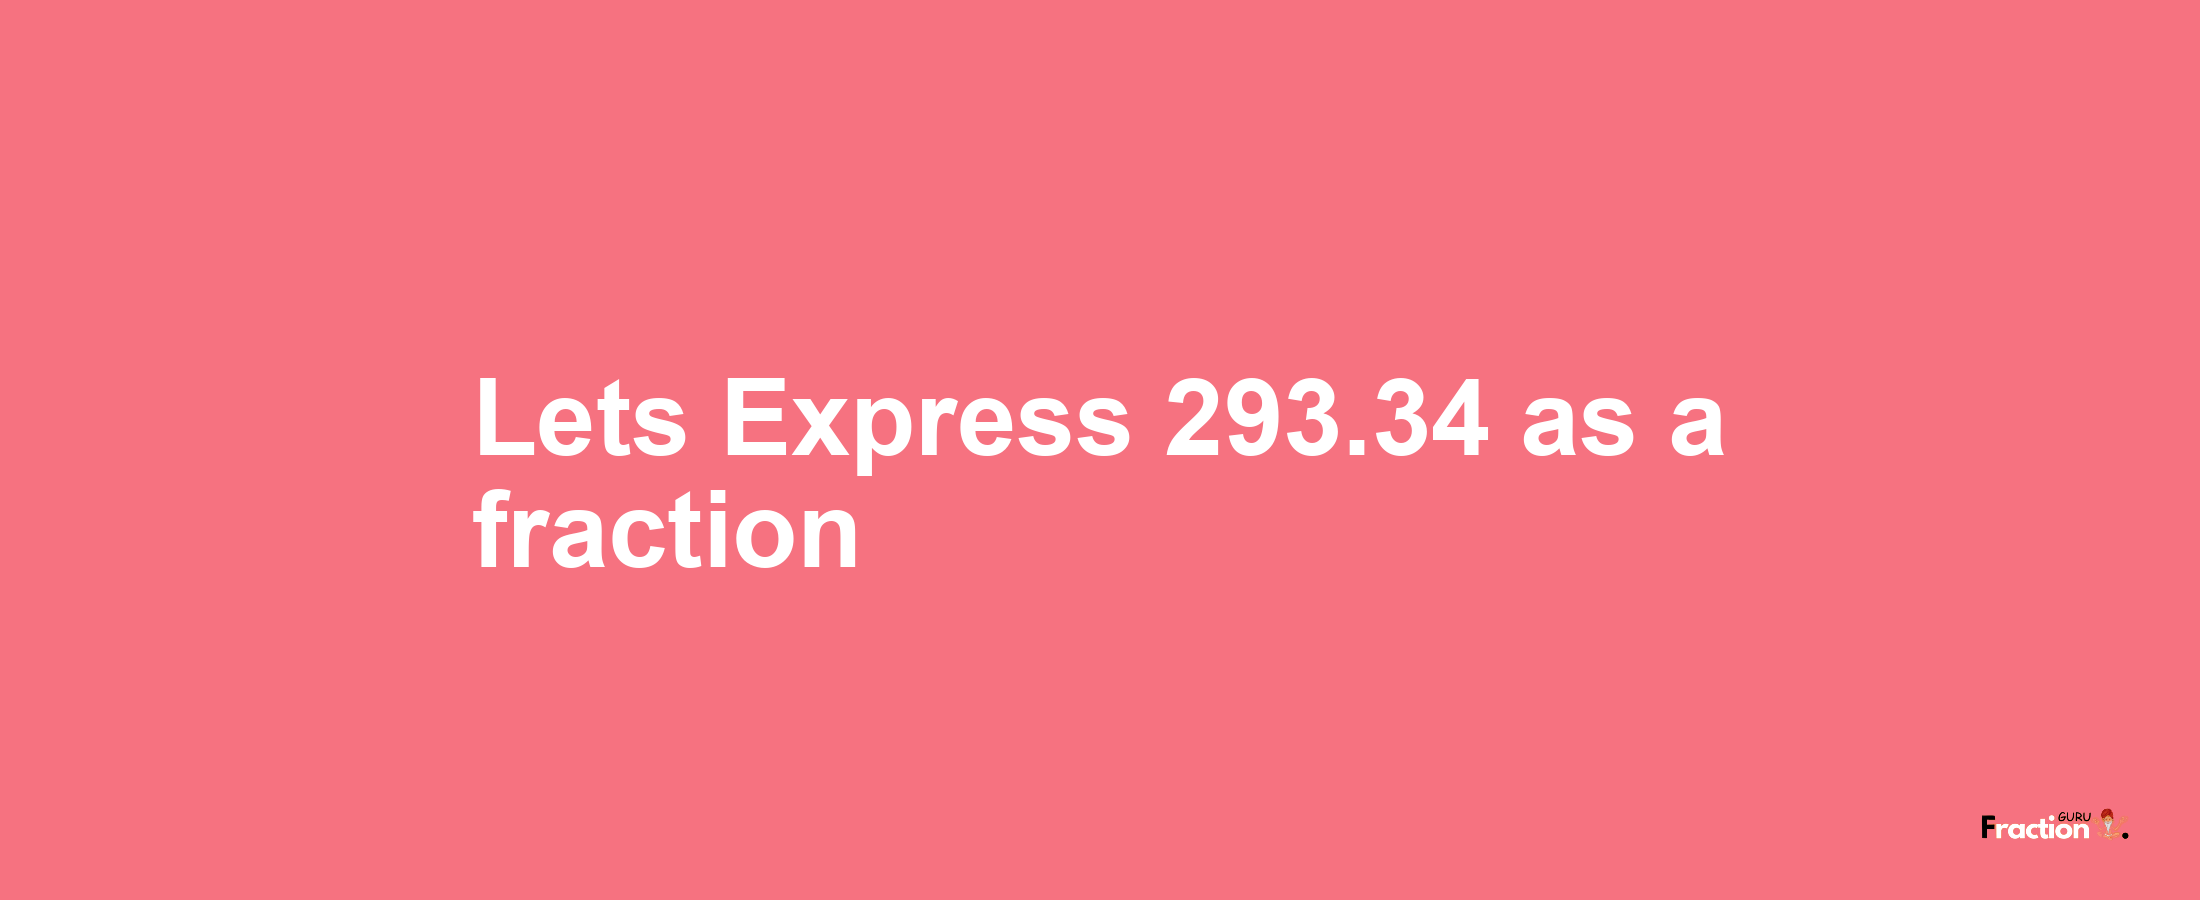 Lets Express 293.34 as afraction